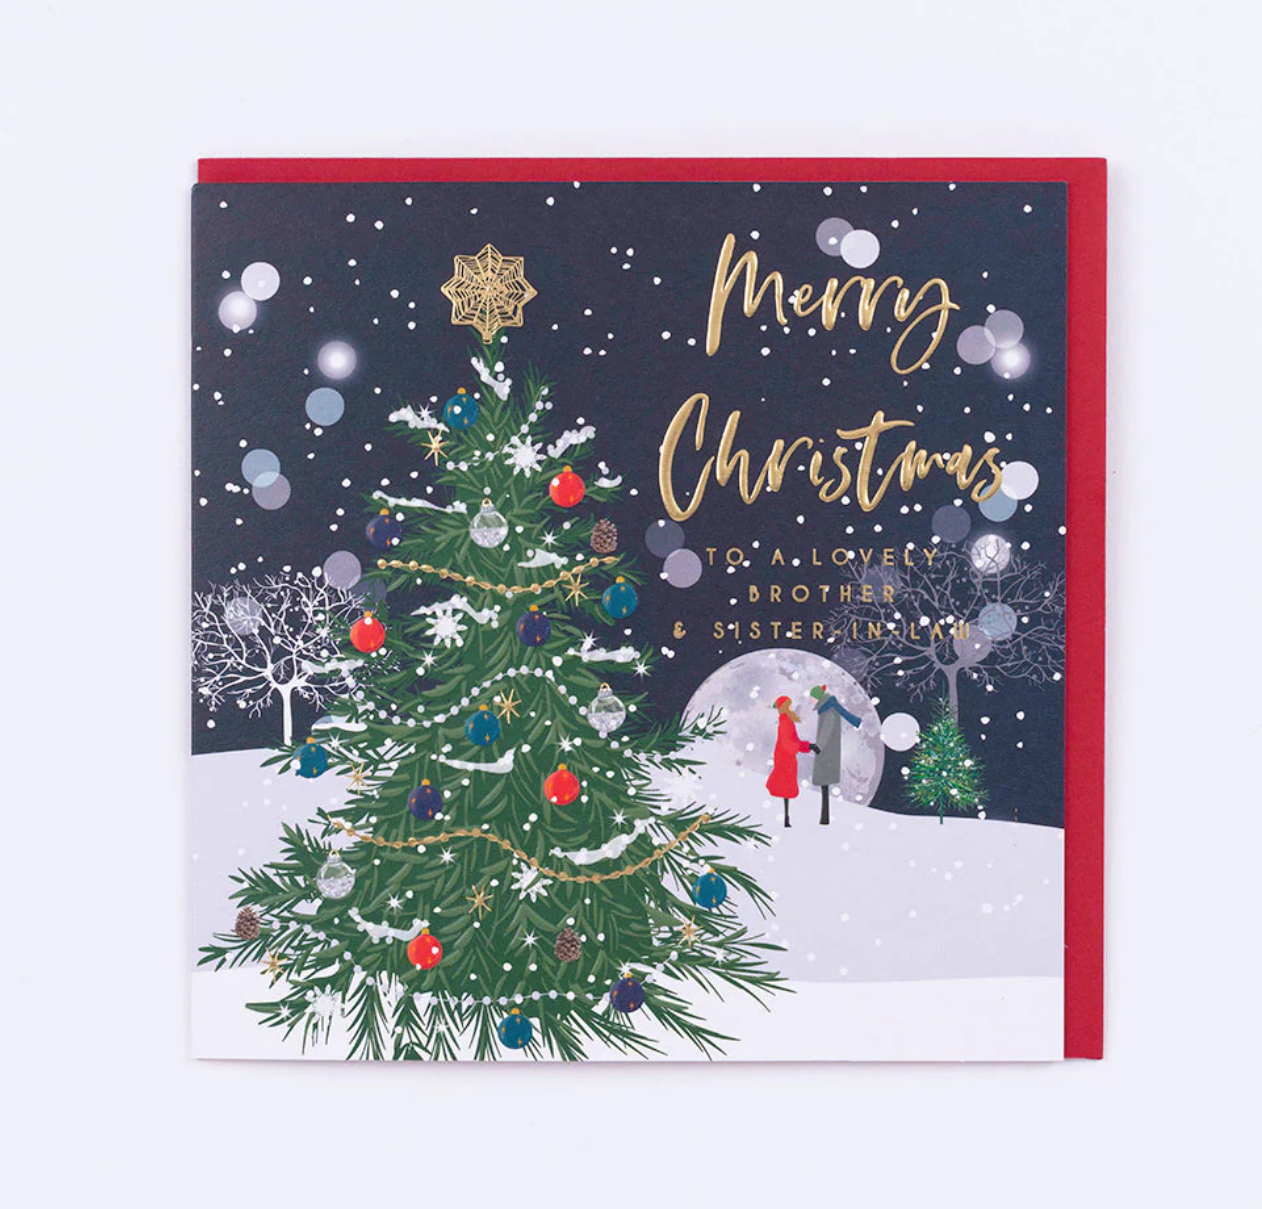 Belly Button Lovely Brother & Sister-in-Law Christmas Tree Card